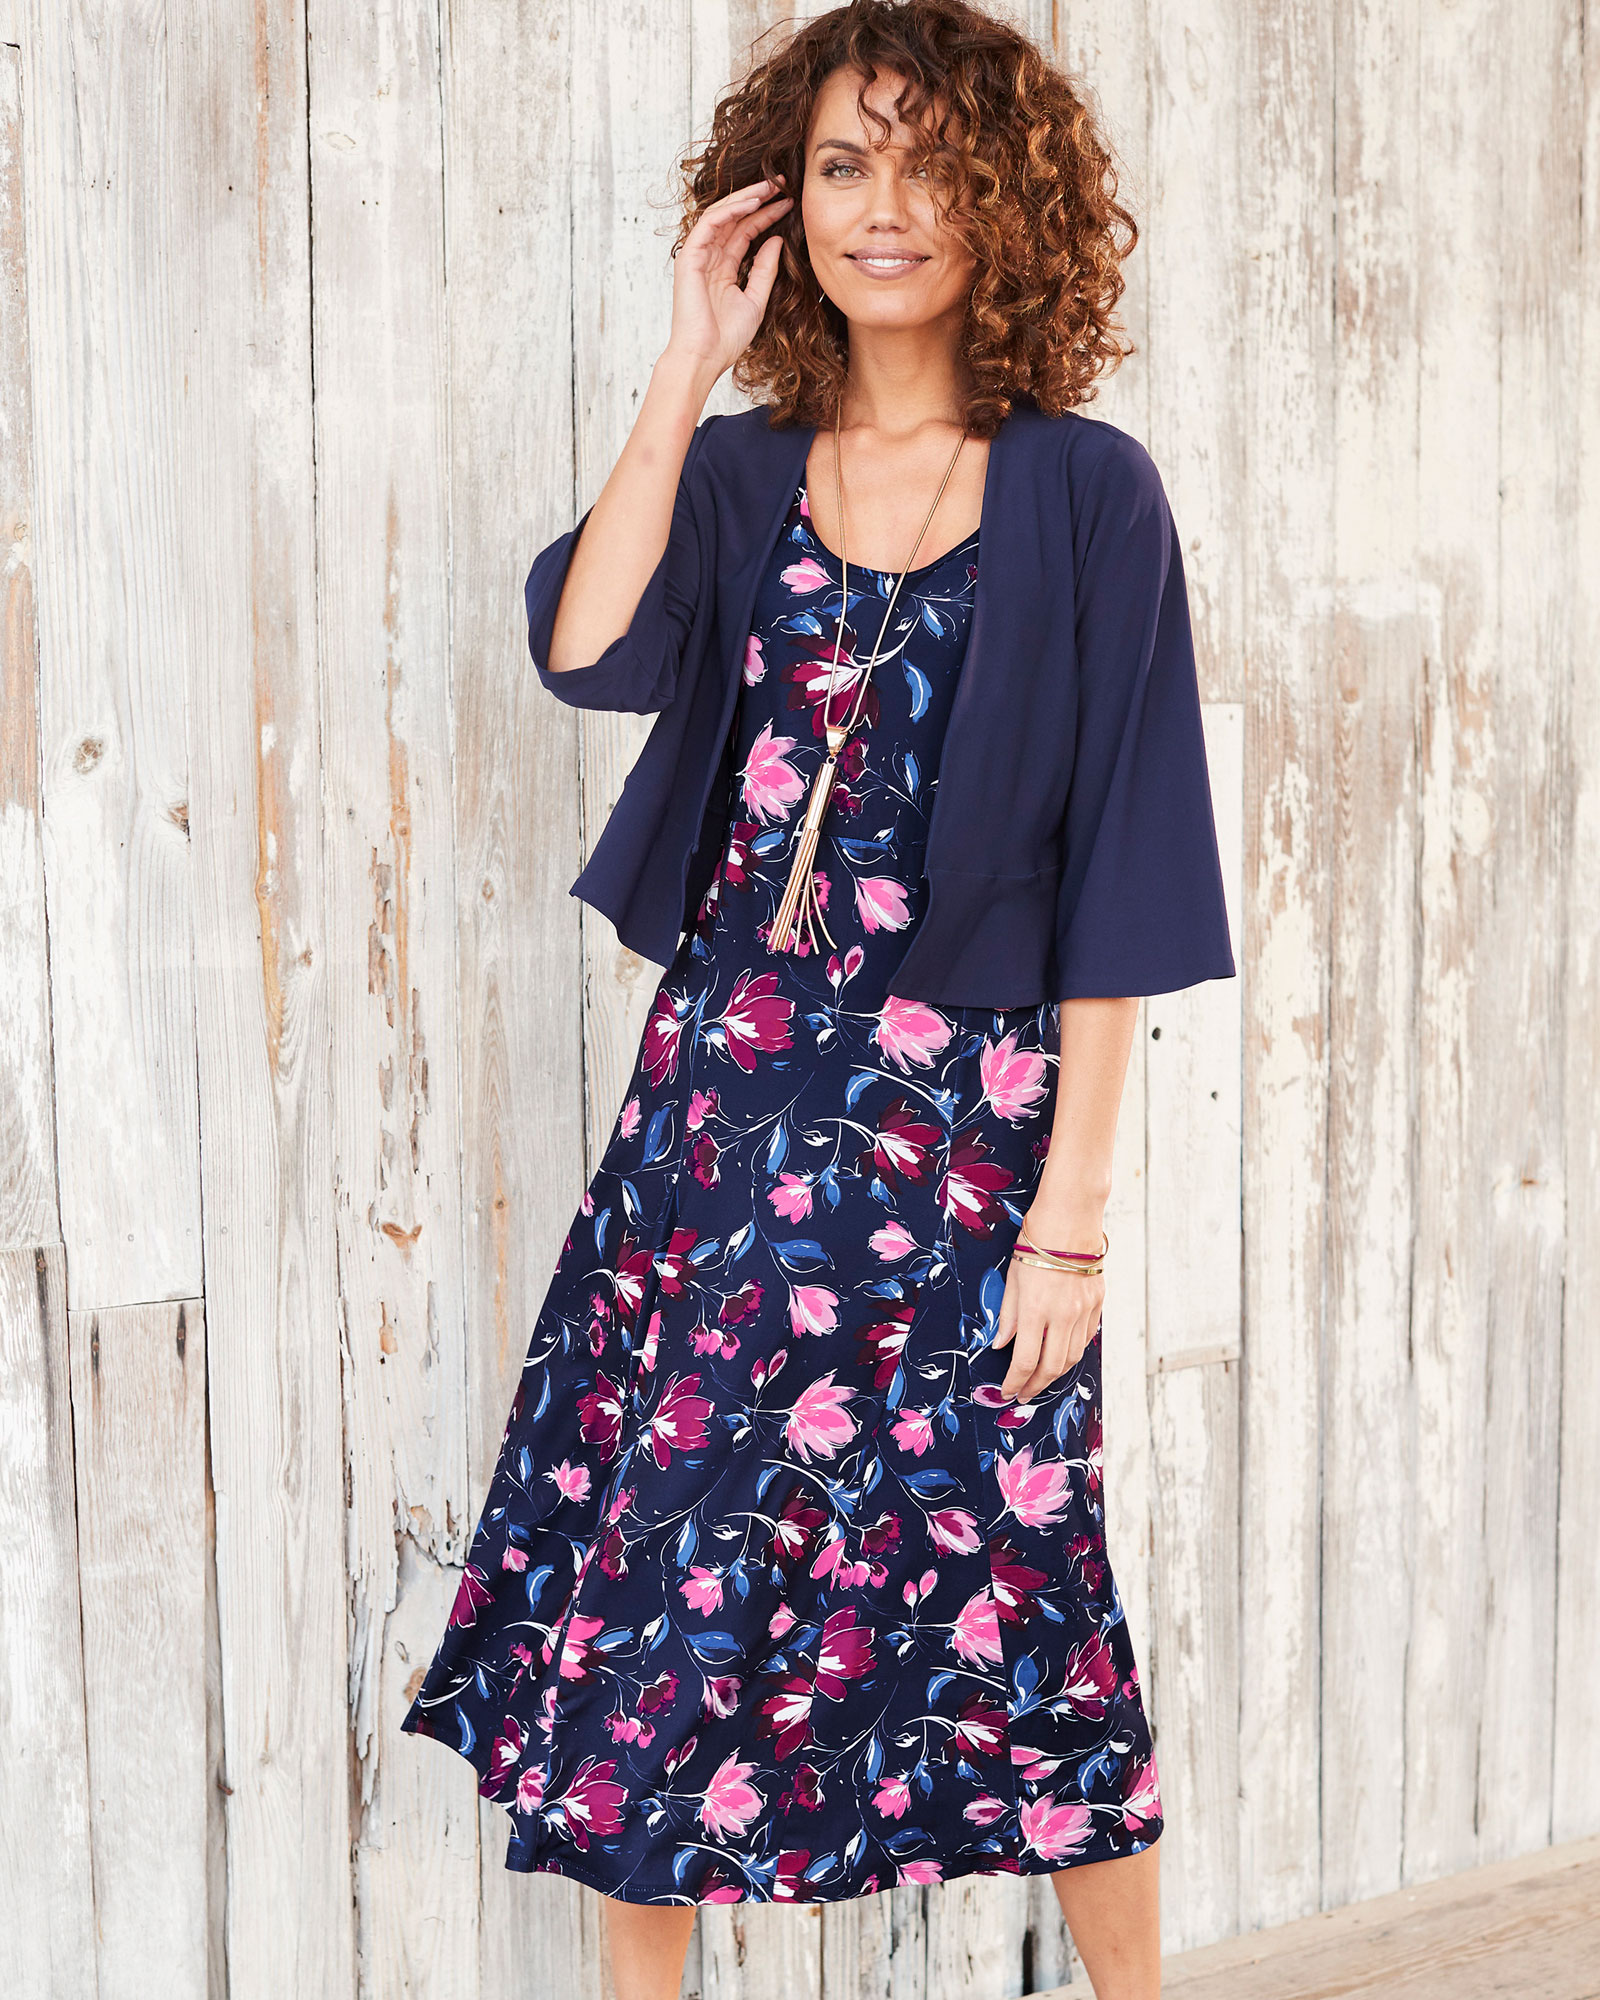 Midi Dress With Shrug at Cotton Traders